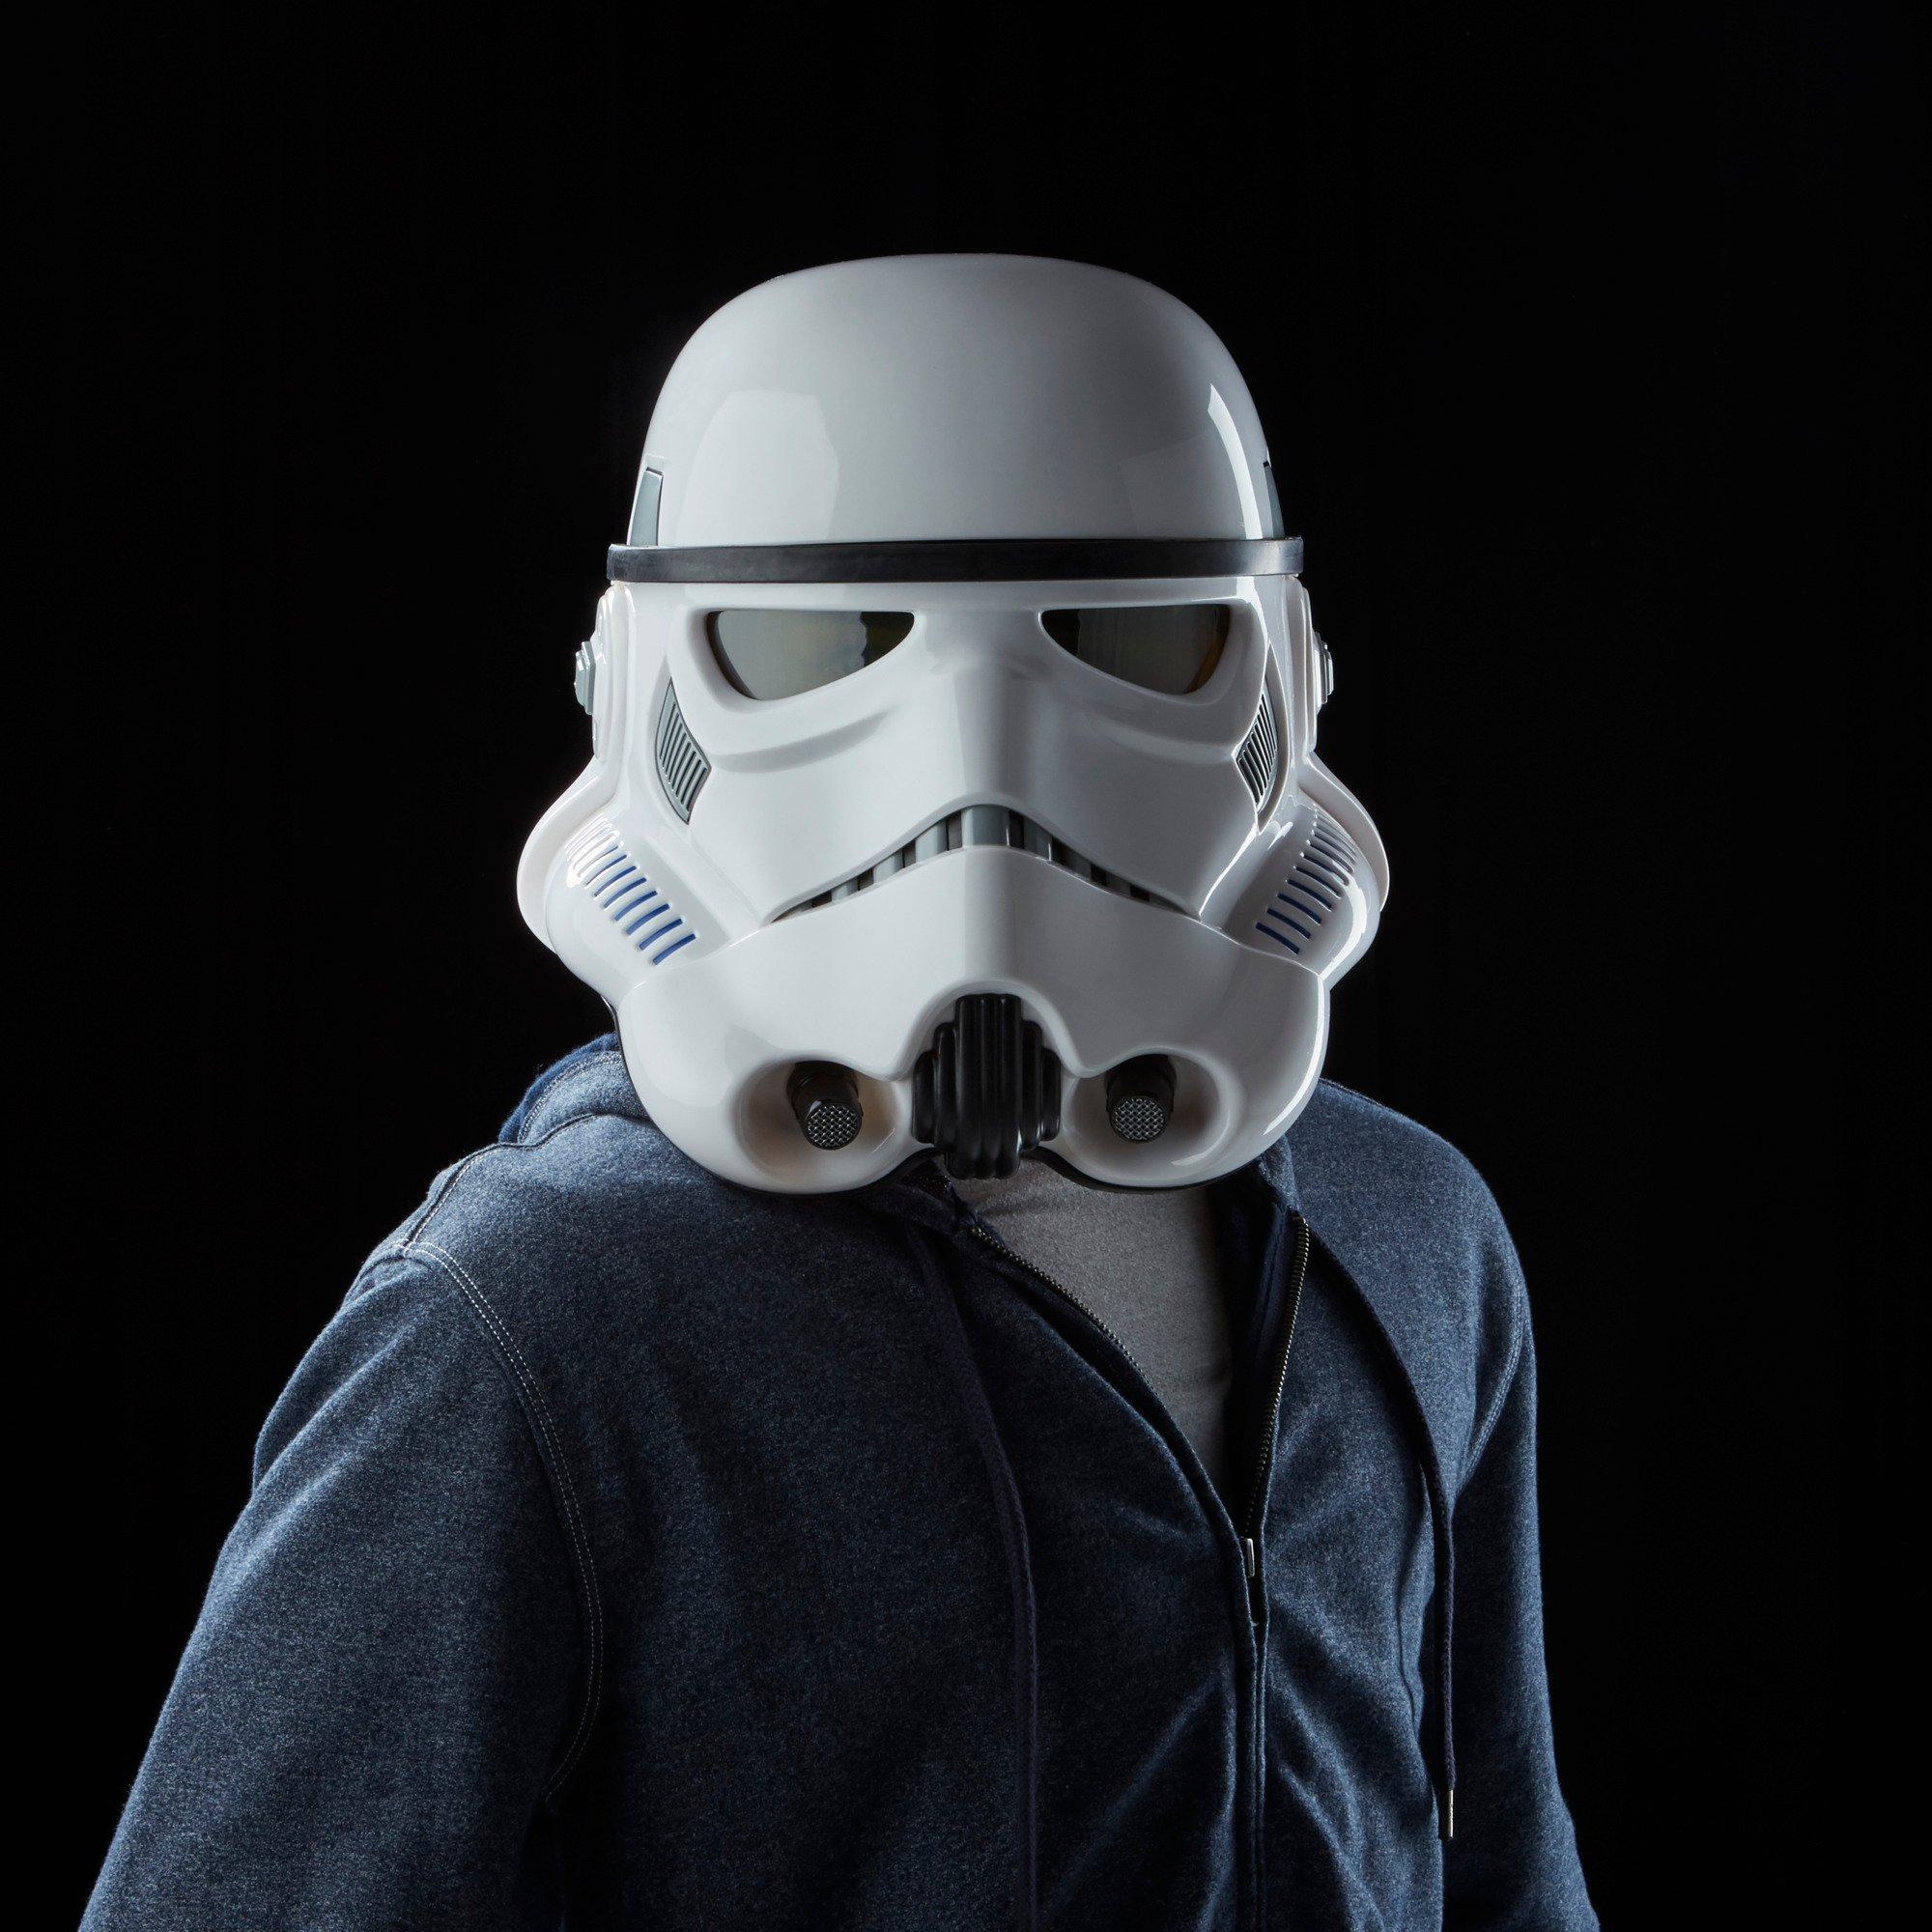 Star Wars The Black Series Rogue One: A Star Wars Story Imperial Stormtrooper Electronic Voice Changer Helmet